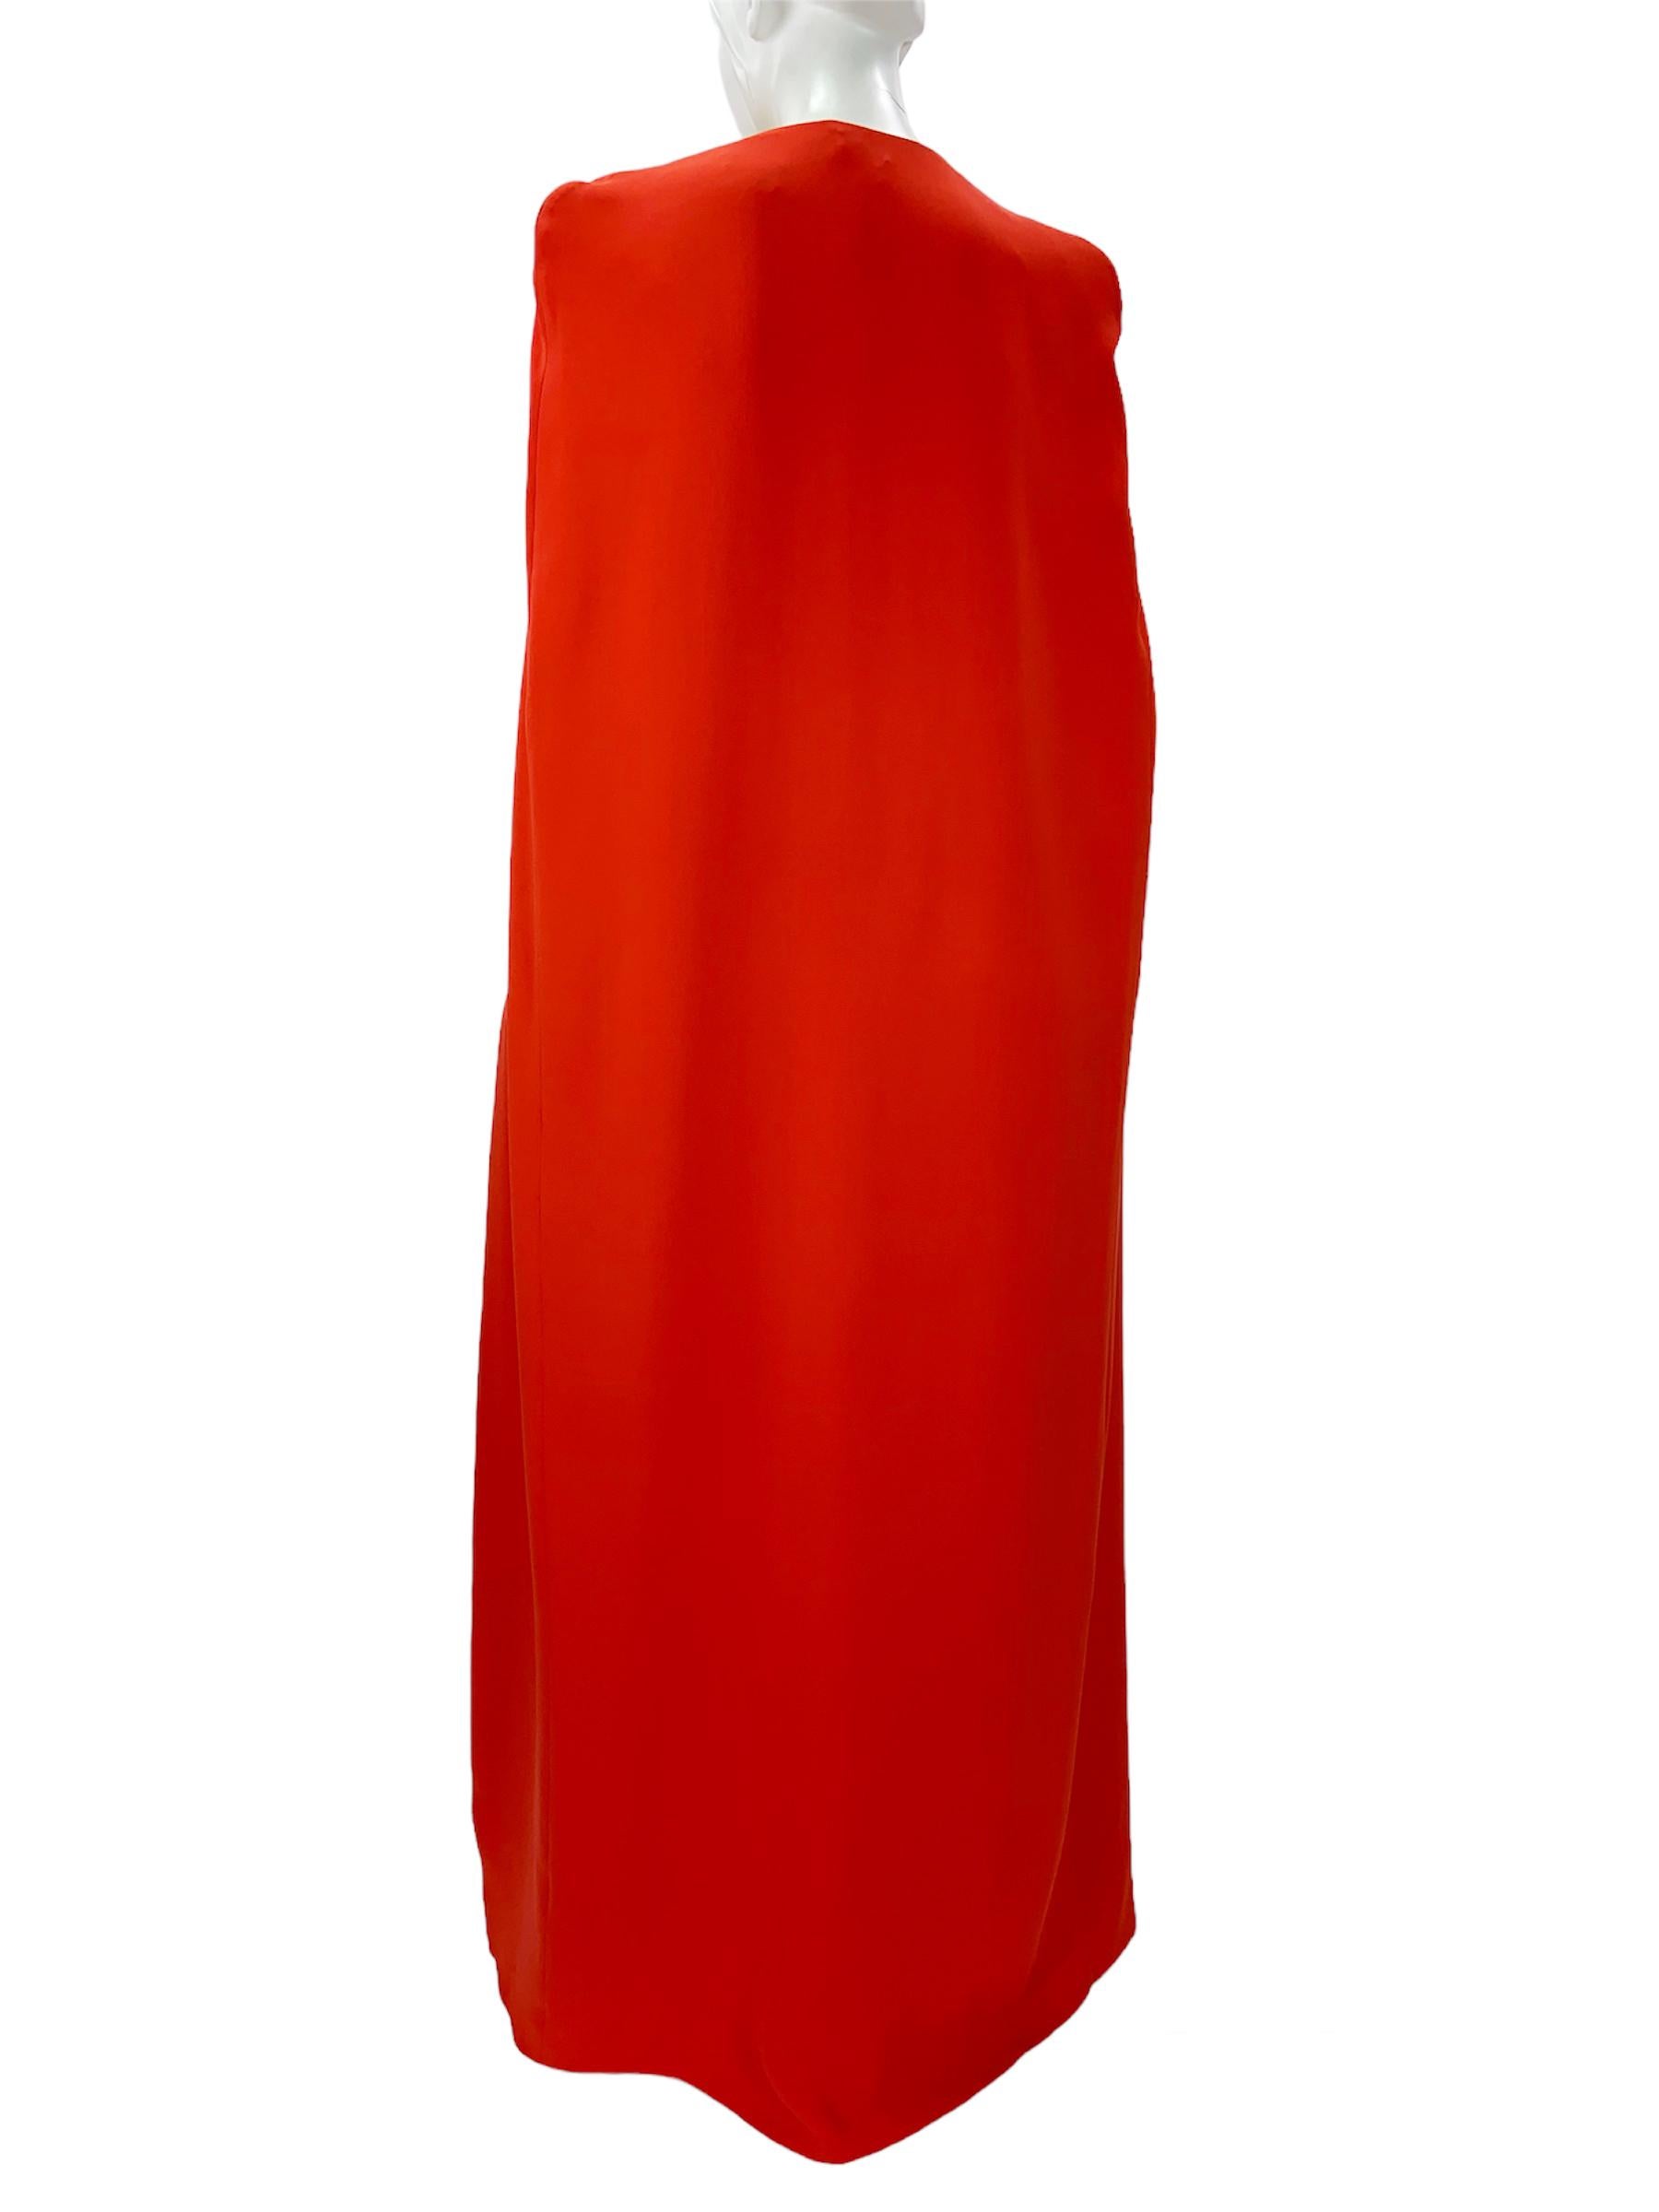 NWT Tom Ford FW 2023 Venetian Red Silk-Georgette Evening Cape Dress Italian 38 For Sale 6